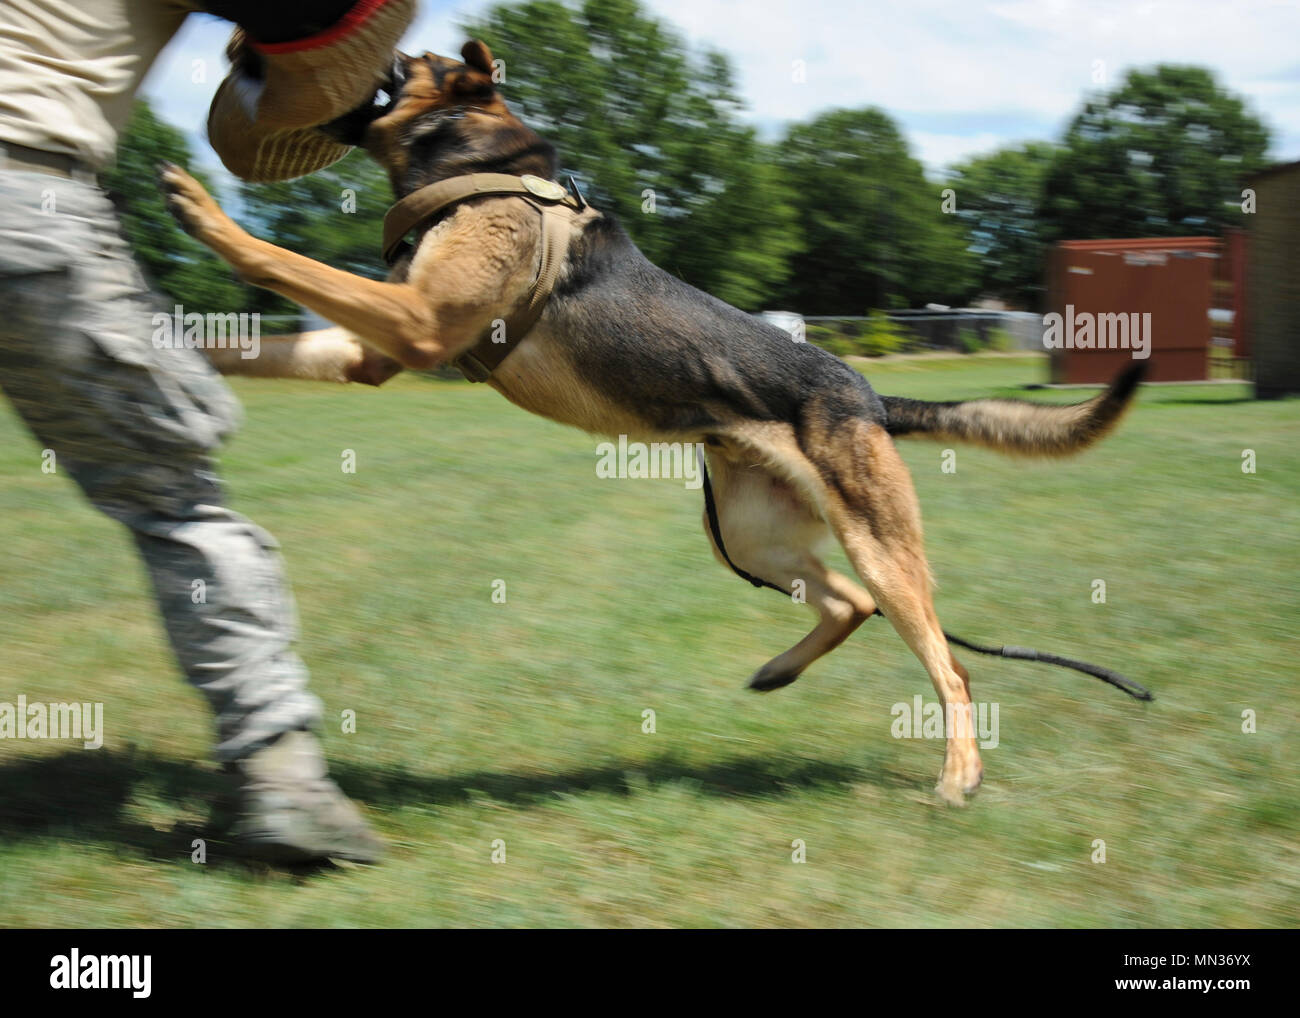 U.S. Air Force military working dog Toni, assigned to the 633rd Security Forces Squadron, attacks on command at Joint Base Langley-Eustis, Va., Aug. 4, 2017. Toni and his handler, Staff Sgt. Jeffrie Kennedy, 633rd SFS MWD handler, recently placed first in the “Iron Dawg” competition where they participated in four challenges, which included a three-mile run, basic obedience coupled with a tactical obedience course, detection and patrol work. (U.S. Air Force photo/Airman 1st Class Anthony Nin Leclerec) Stock Photo